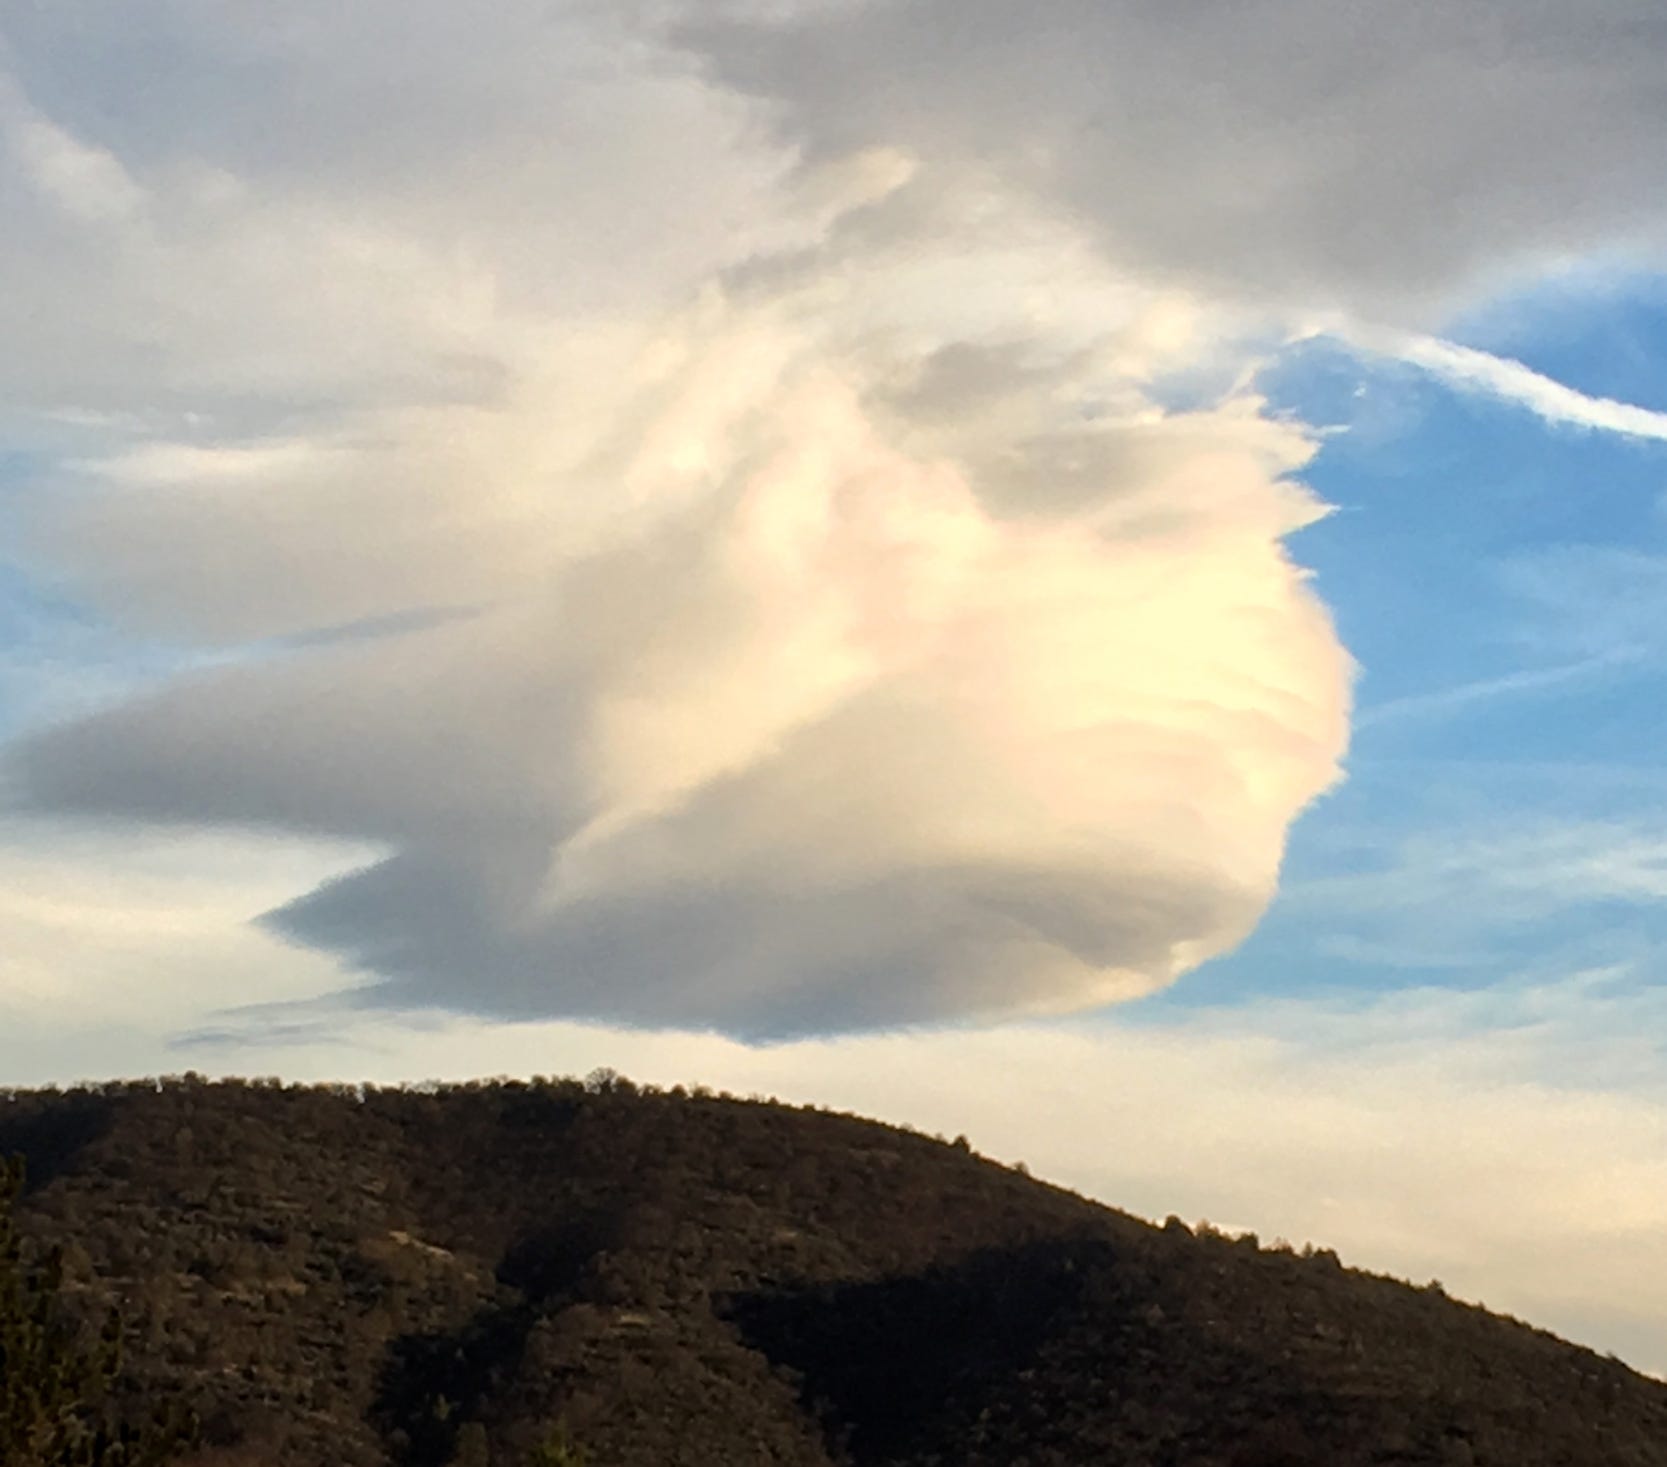 Lenticular clouds from the Mt. Shasta area in 2018.